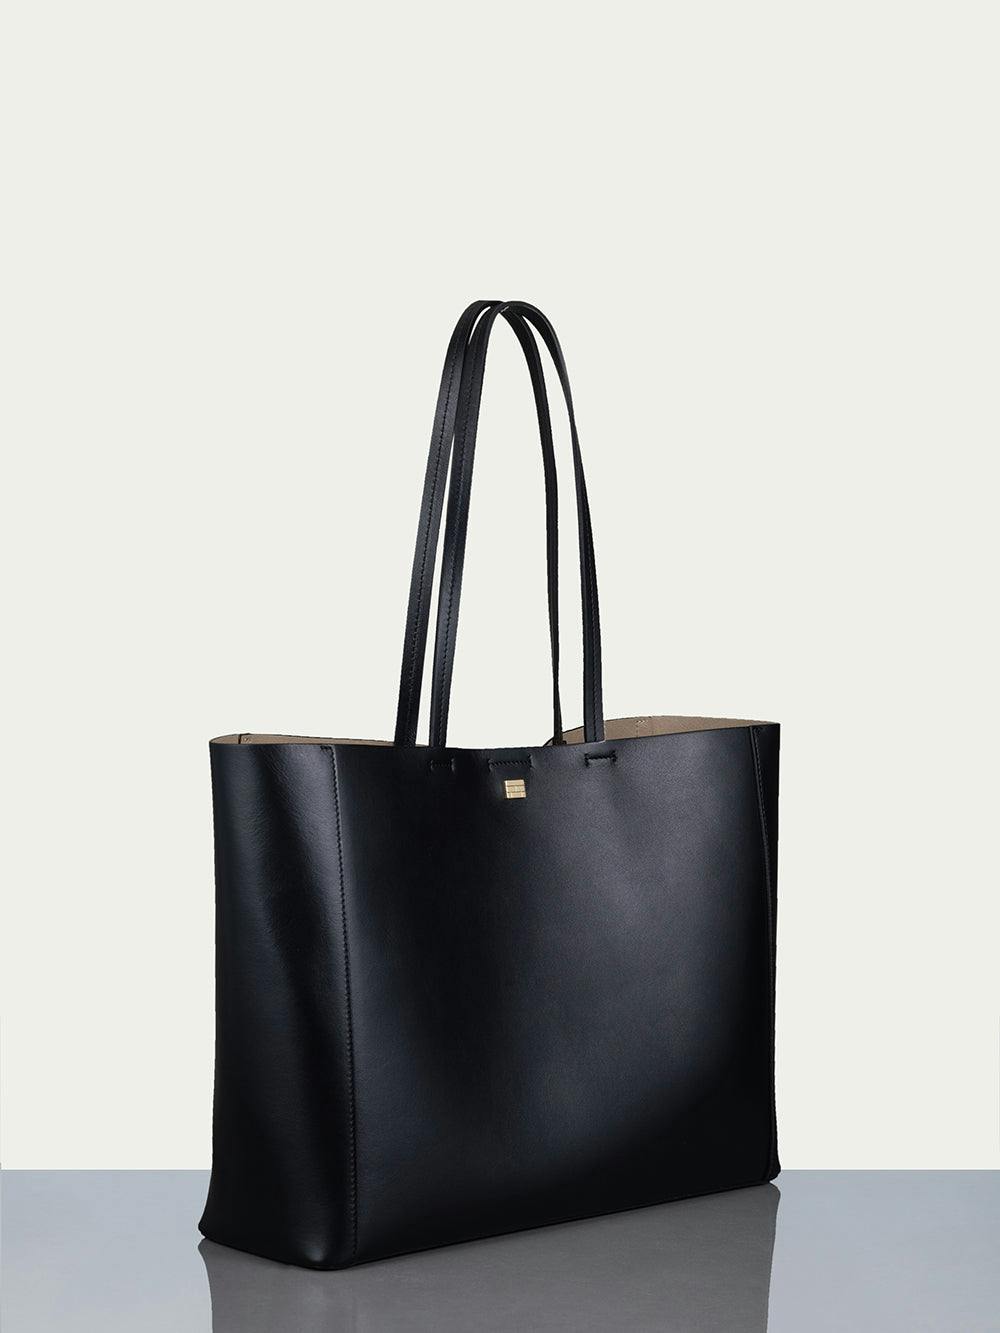 tote side view 